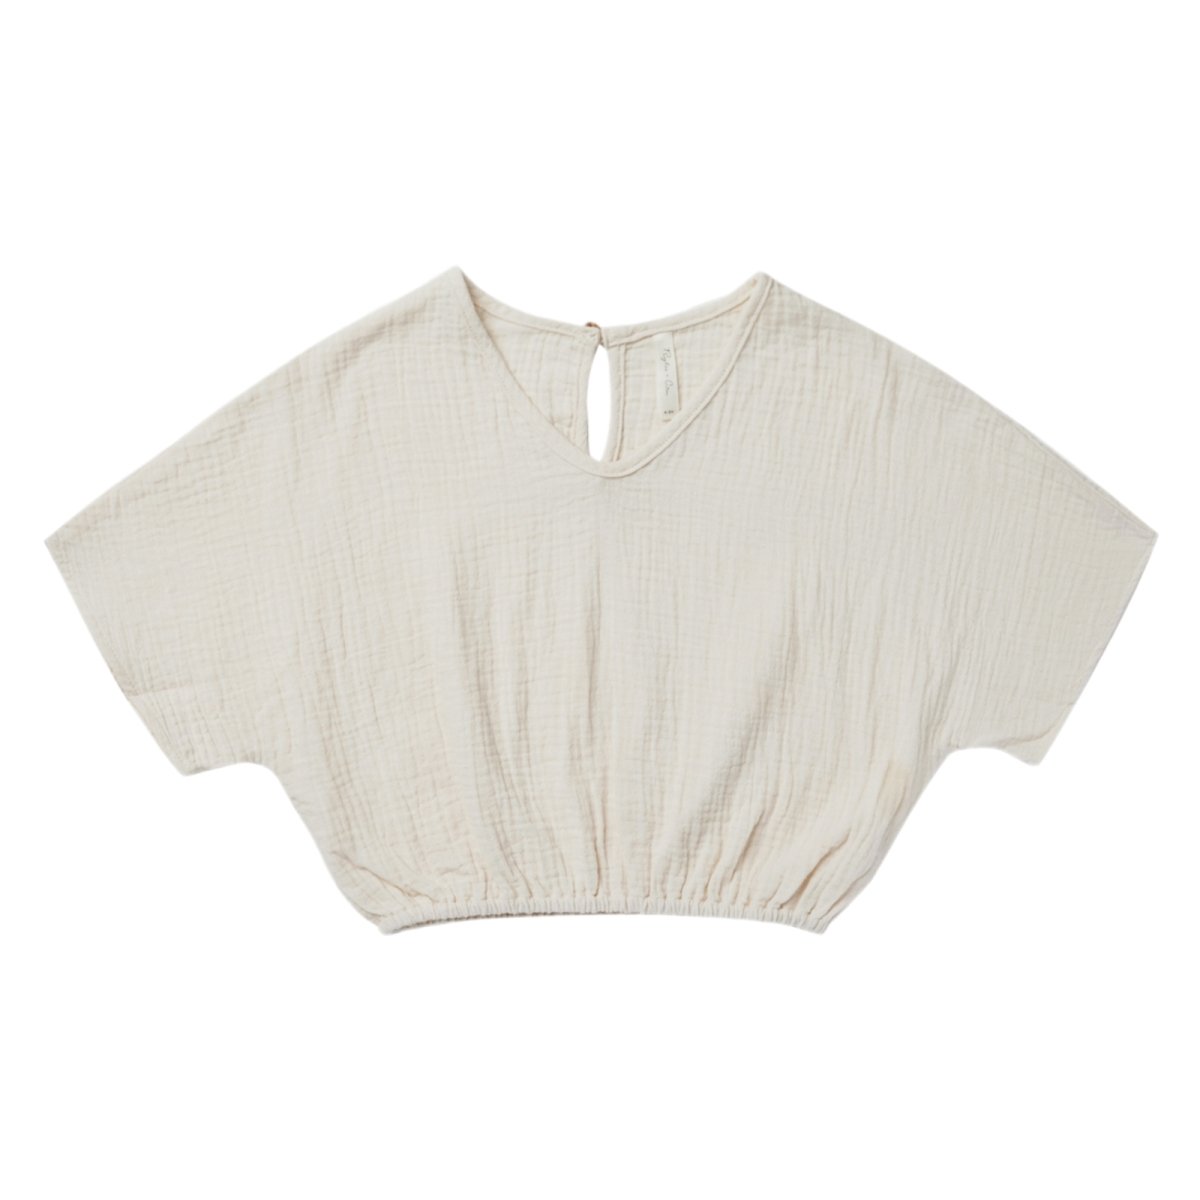 LILY SOLID BLOUSE TOP - SHORT SLEEVE TOPS